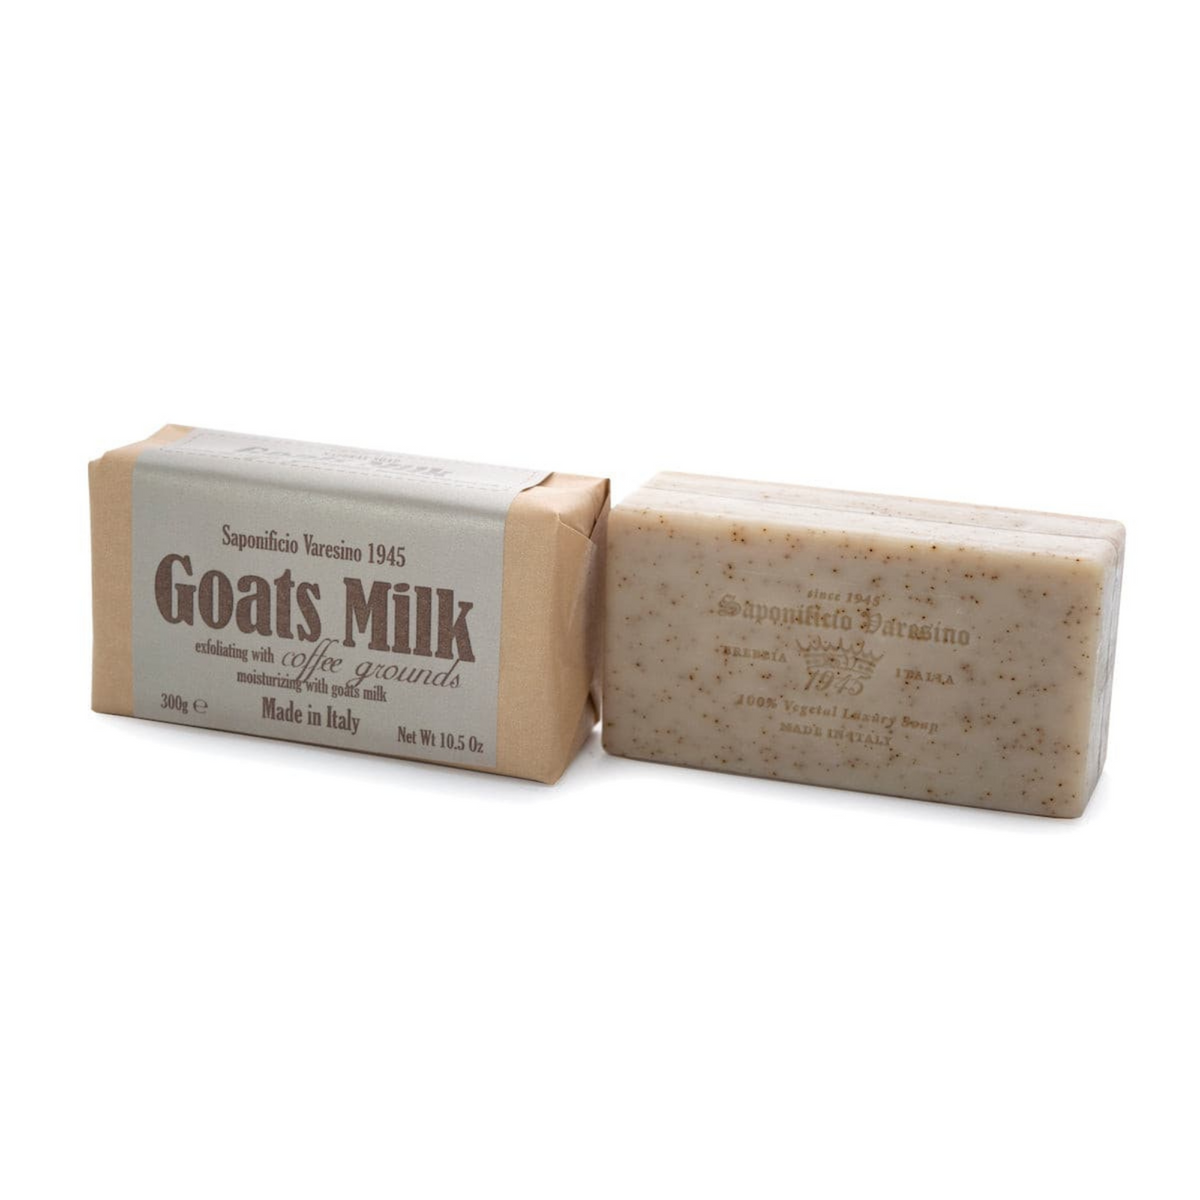 Primary Image of Saponificio Varesino Goats Milk with exfoliating Coffee Grounds Soap (300 g)